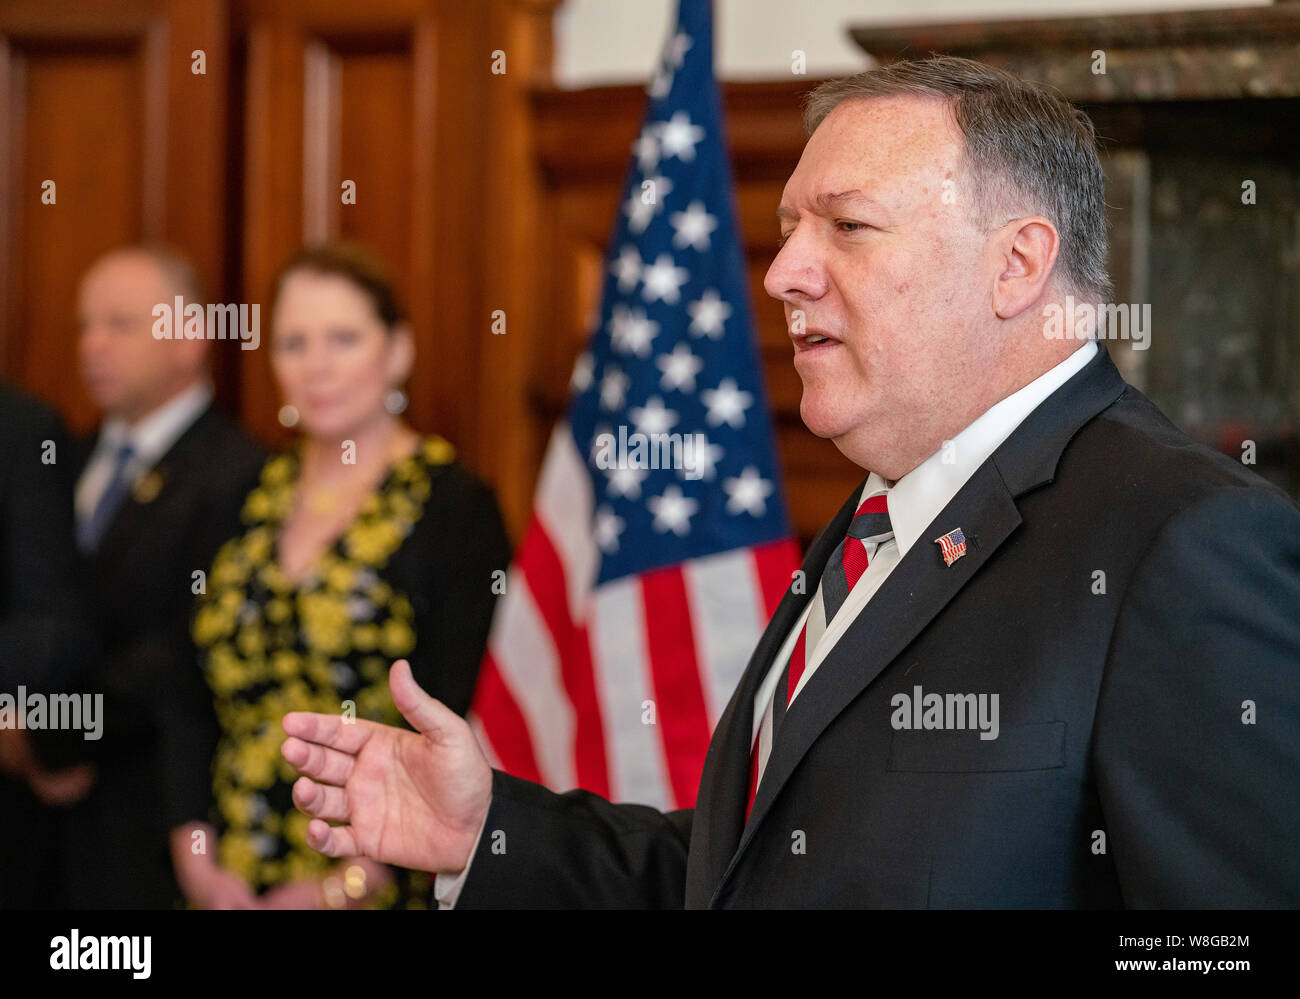 U.S. Secretary of State Michael R. Pompeo meets with personnel of U.S. Mission Australia in Sydney, Australia, on August 5, 2019. Stock Photo